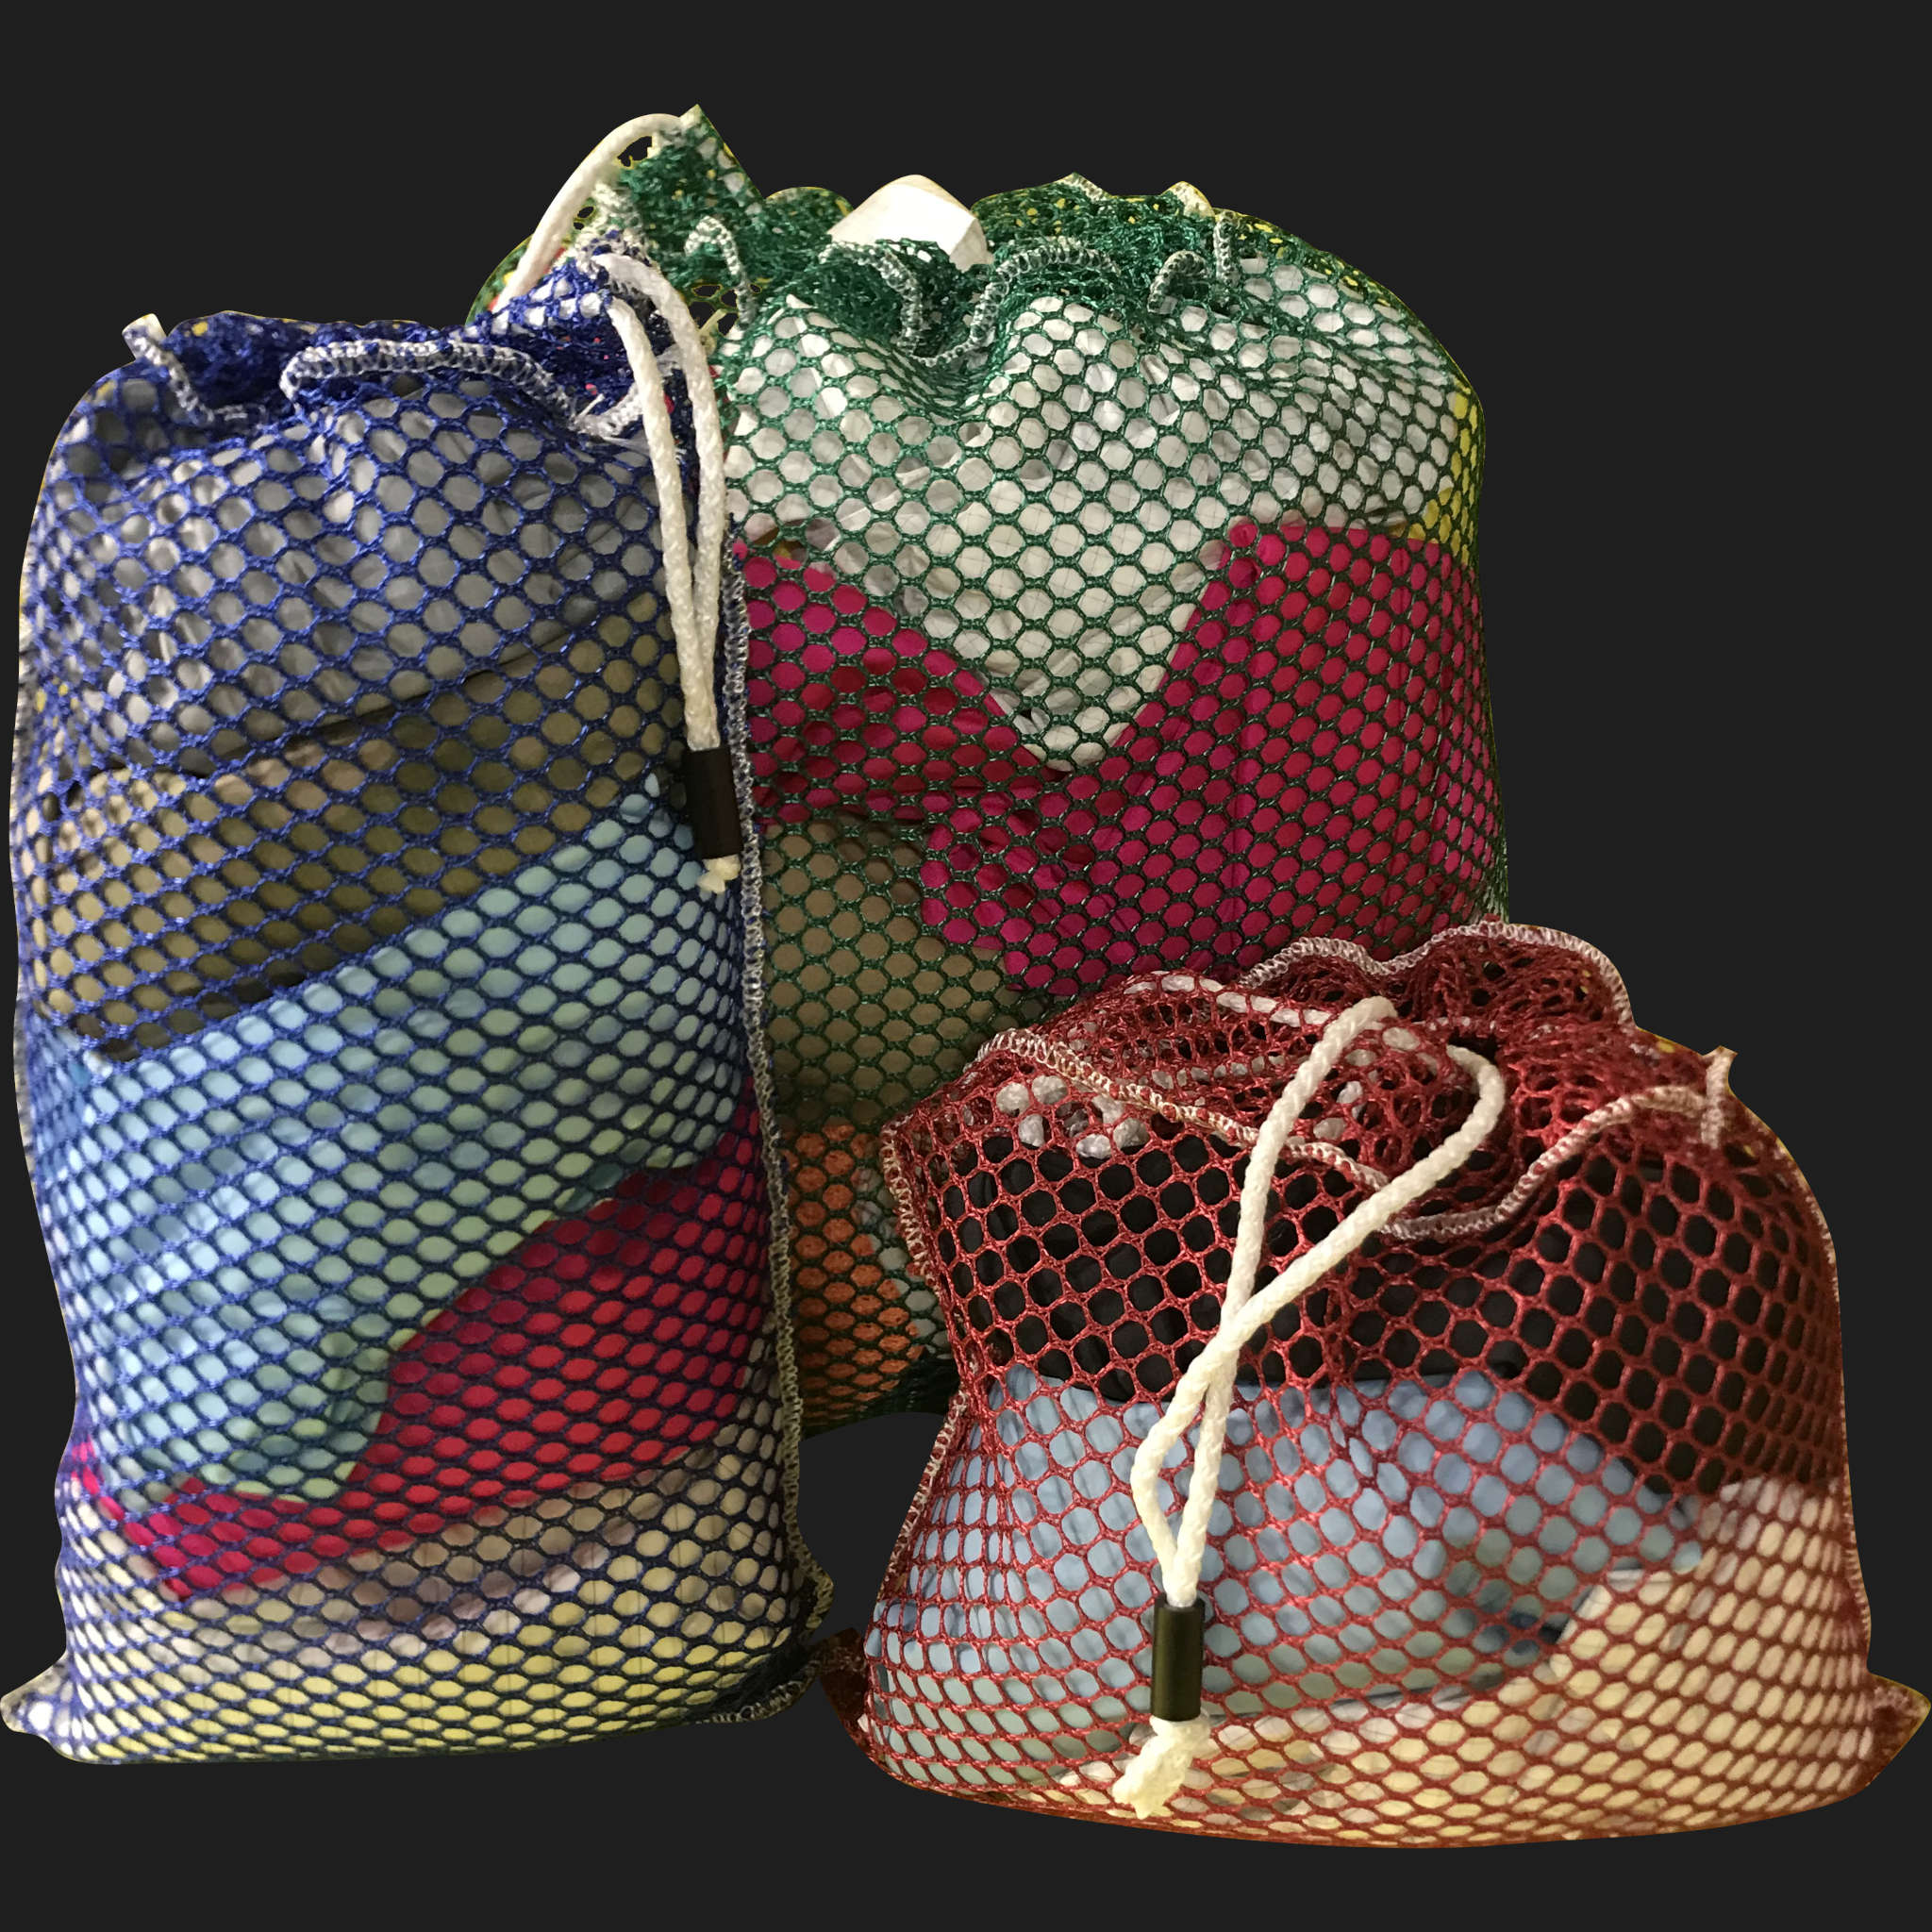 46" x 64" Customized Mesh-Net-Laundry Bags Heavy Duty with Cord and barrellock closure